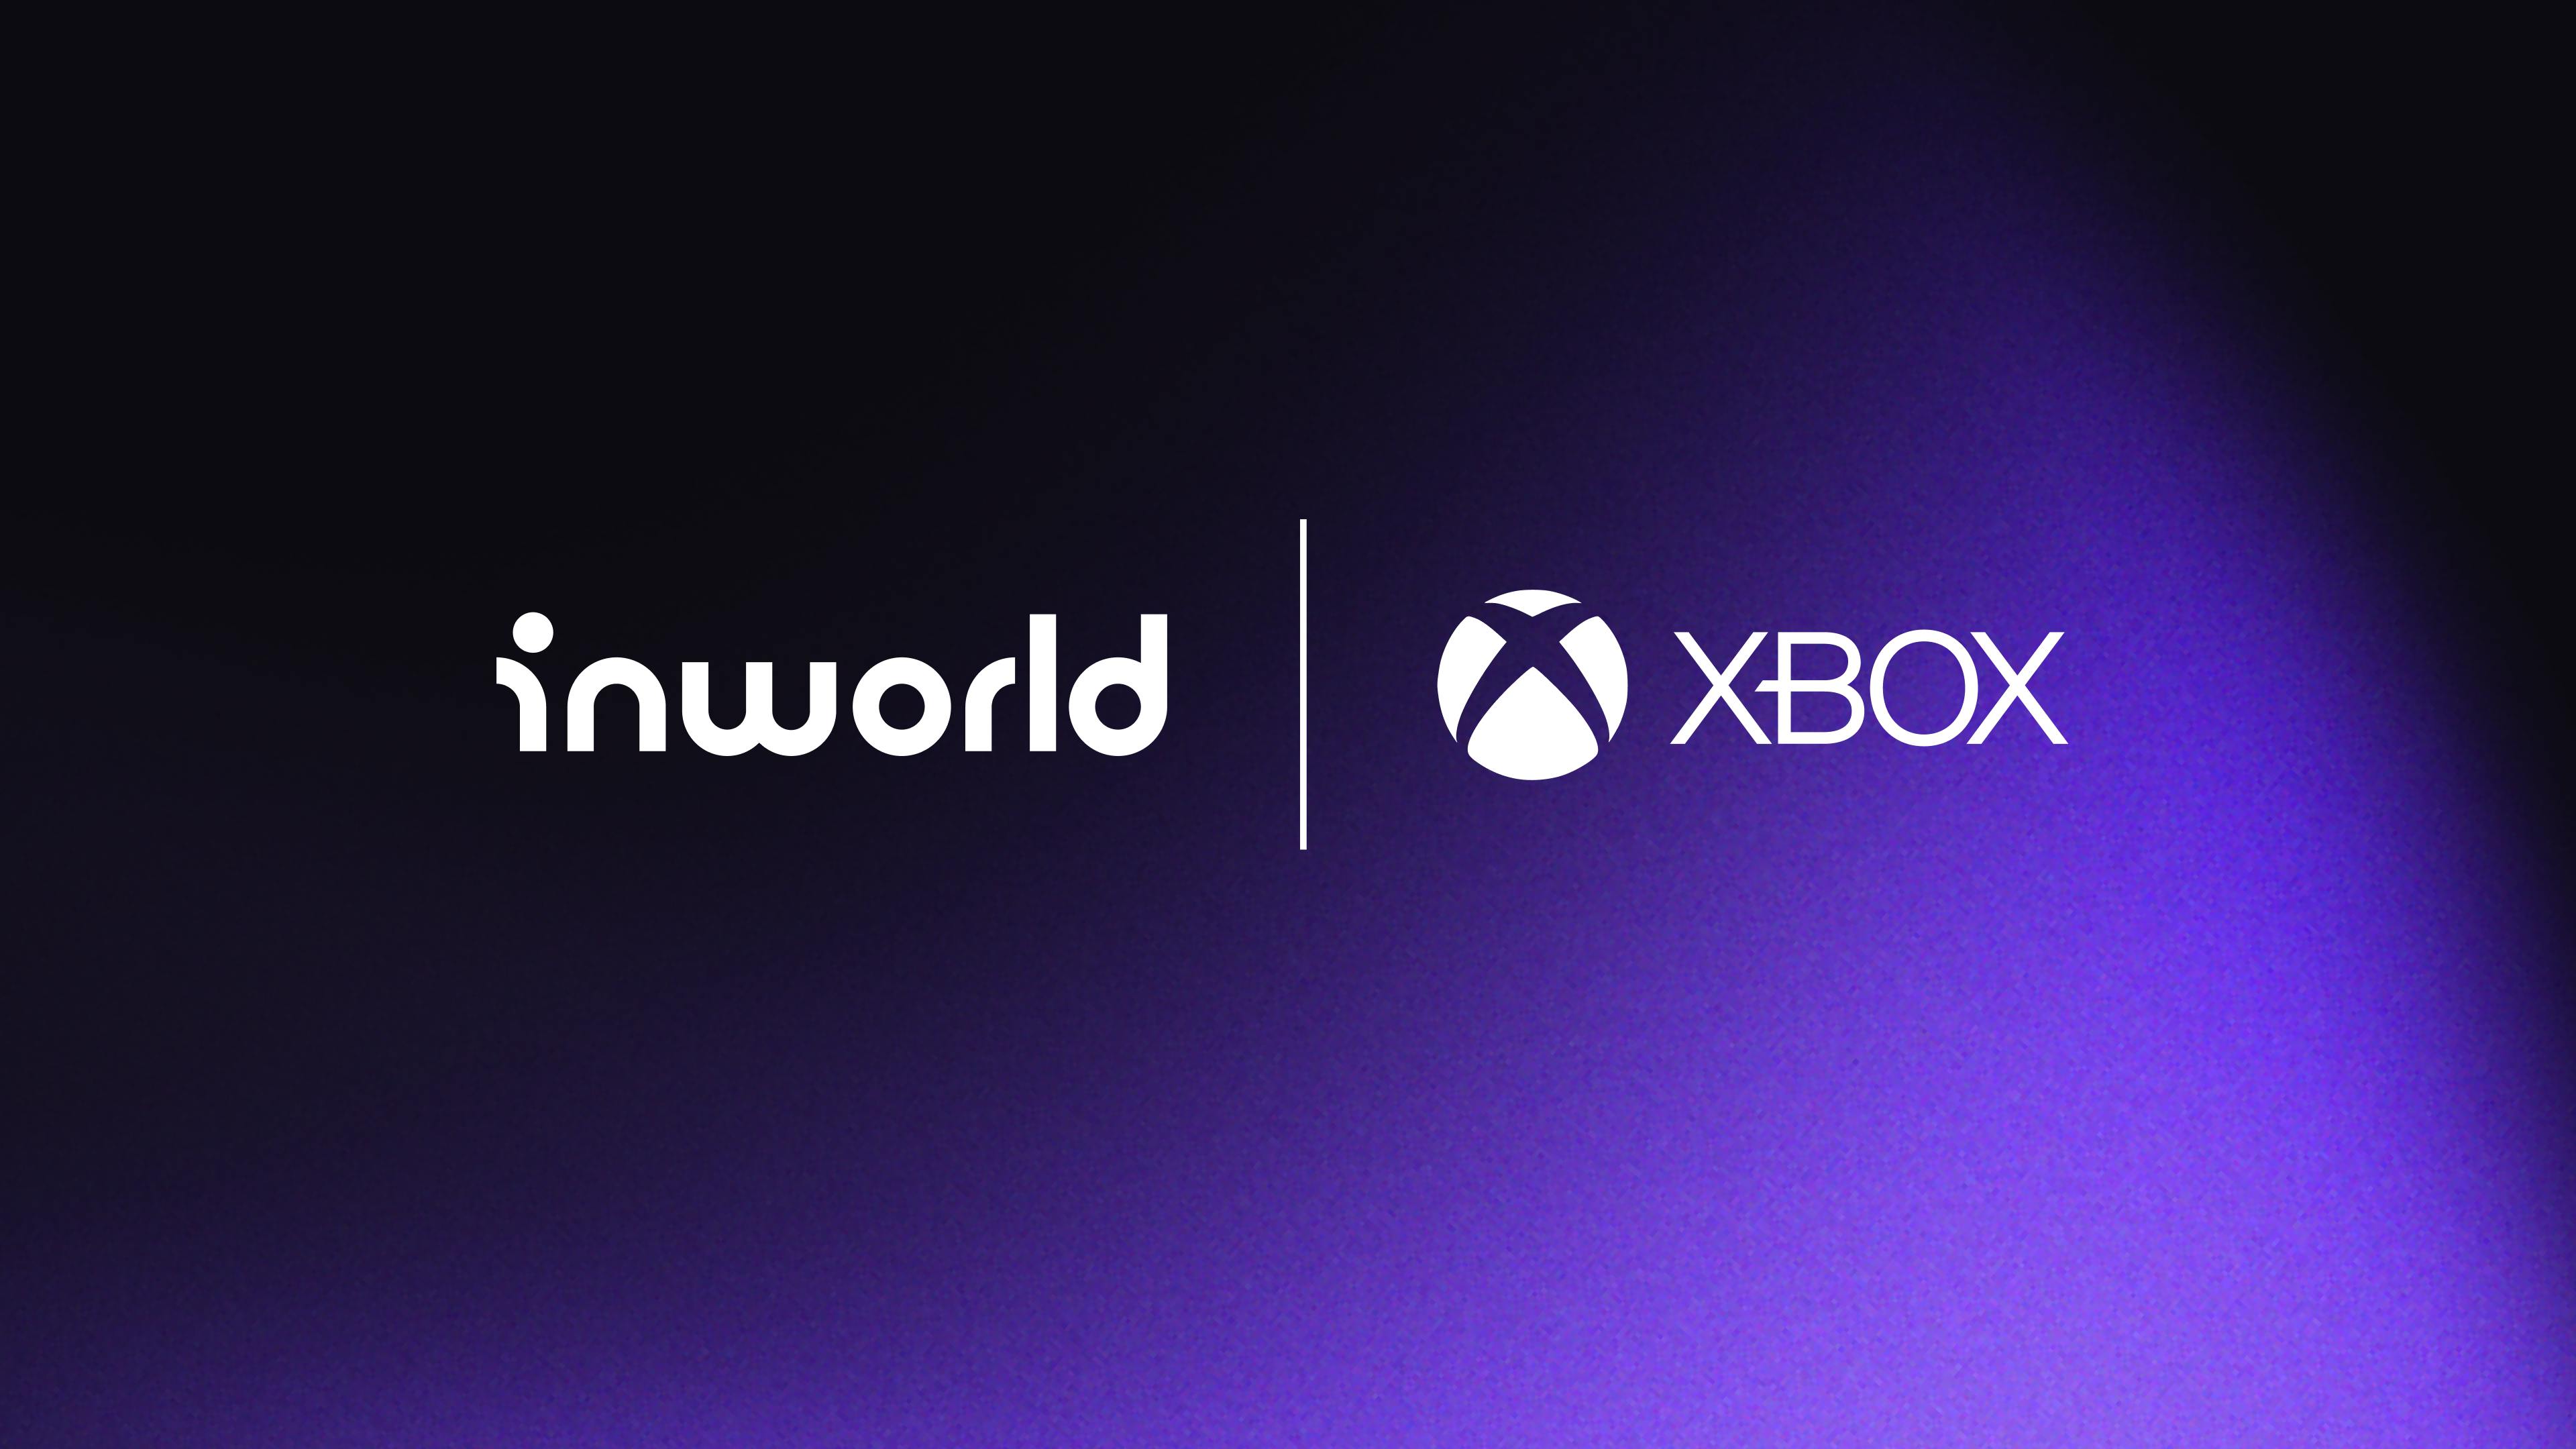 Xbox and Inworld will work together to build a powerful toolkit that harnesses AI to enrich the narrative and character creation elements of game development. 